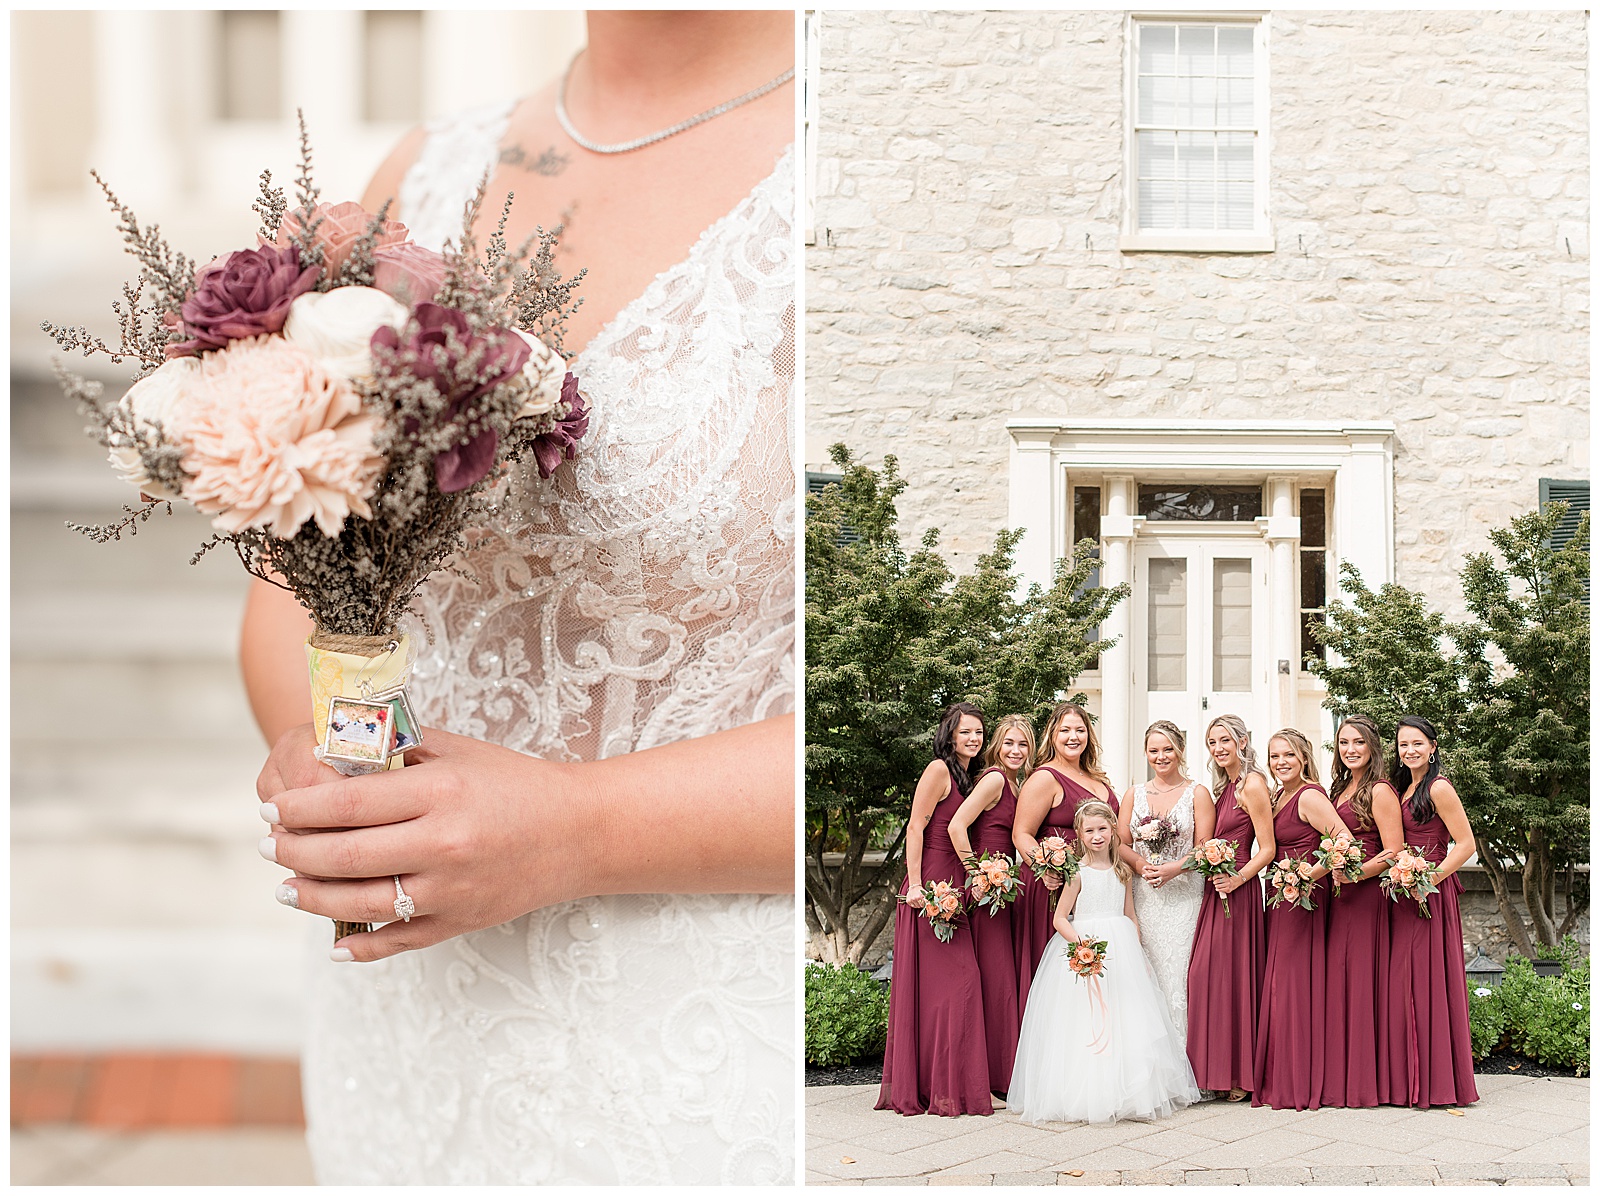 bride holding bouquet and bride standing with bridal party by stone building